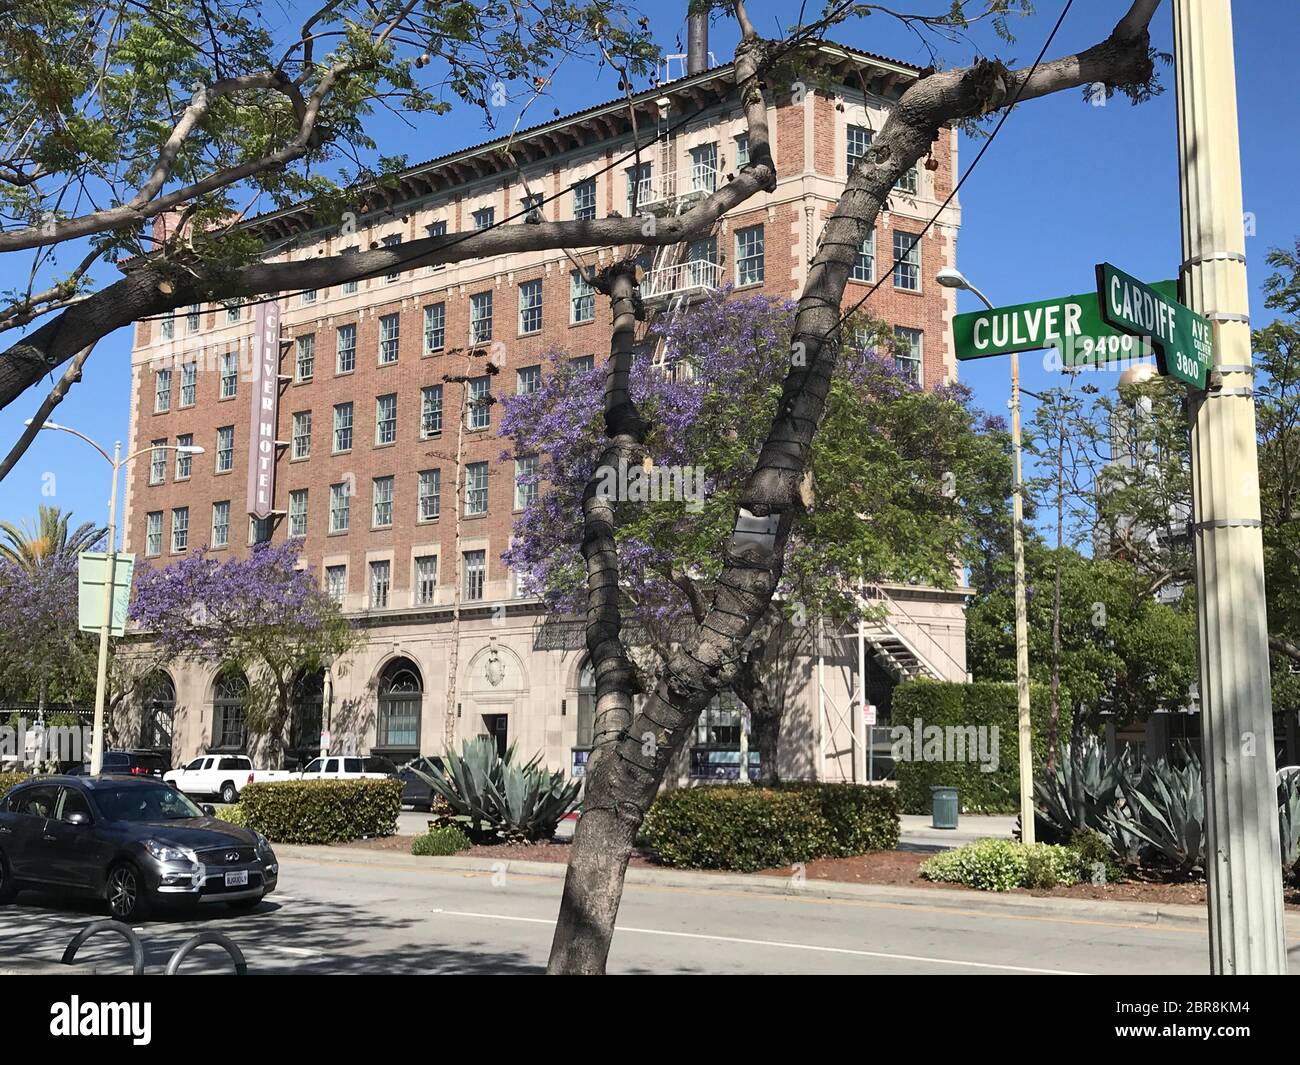 The historic Culver Hotel in downtown Culver City, CA Stock Photo